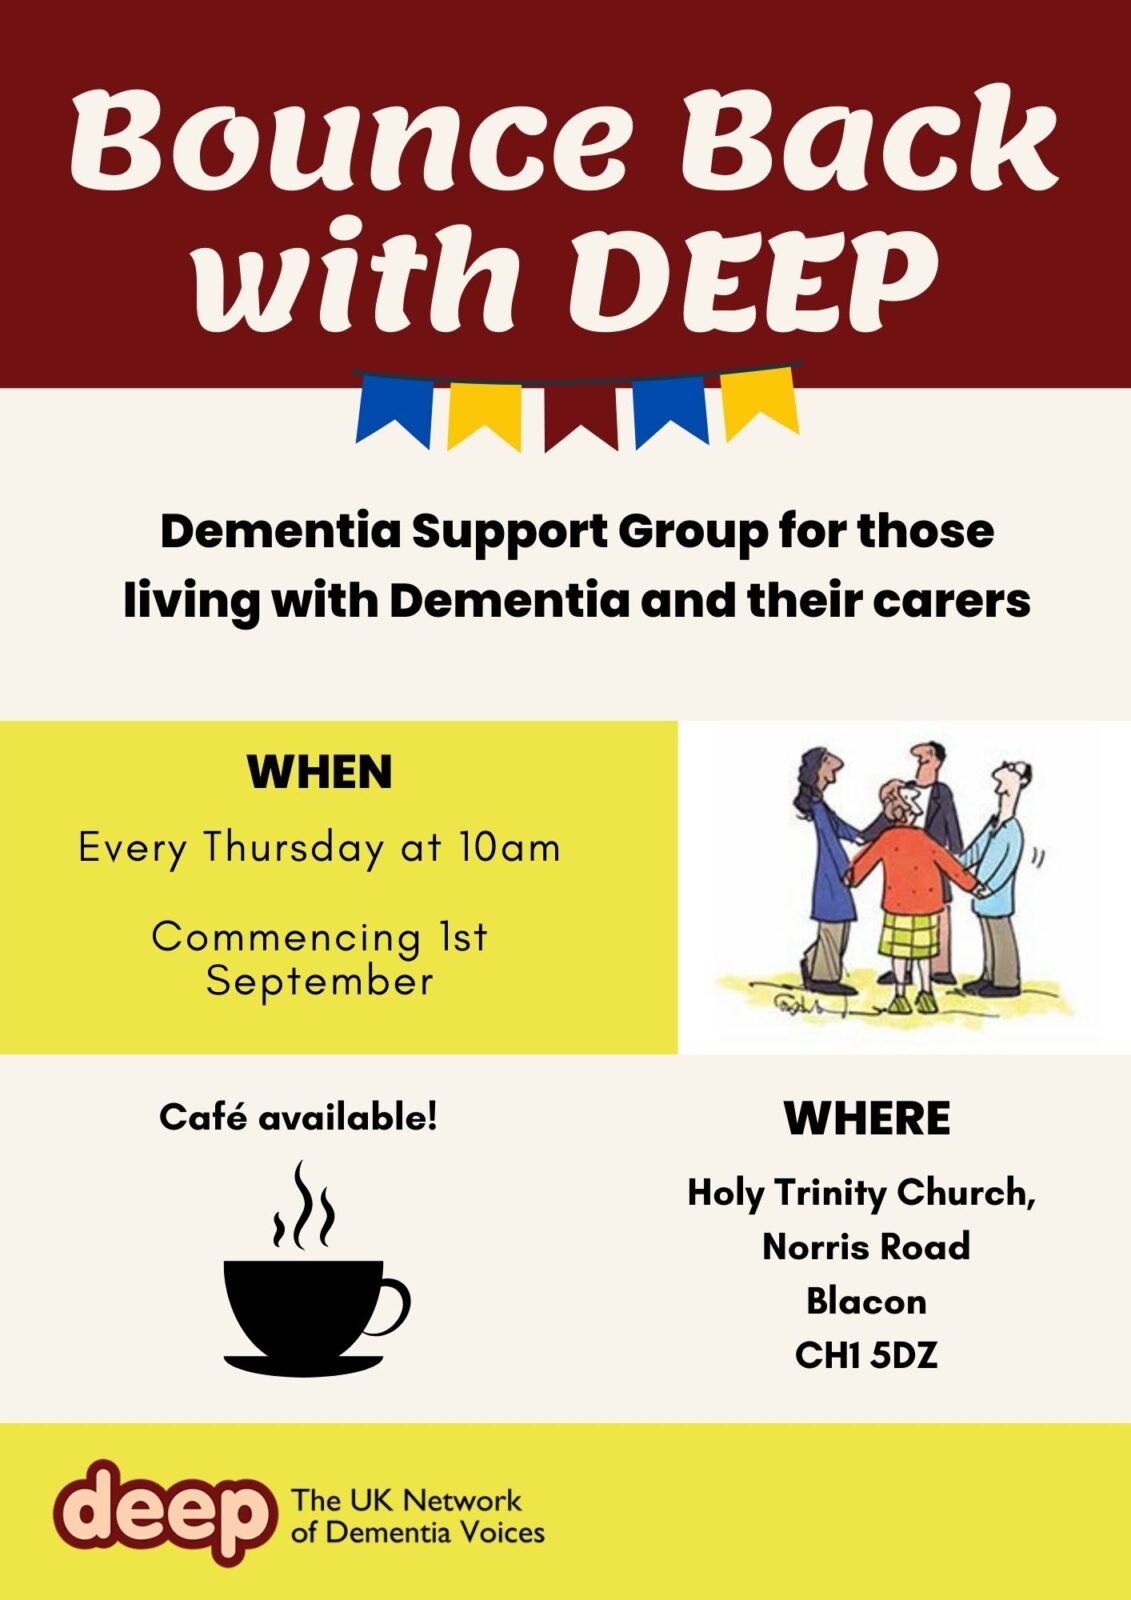 A new Dementia Support Group in Blacon